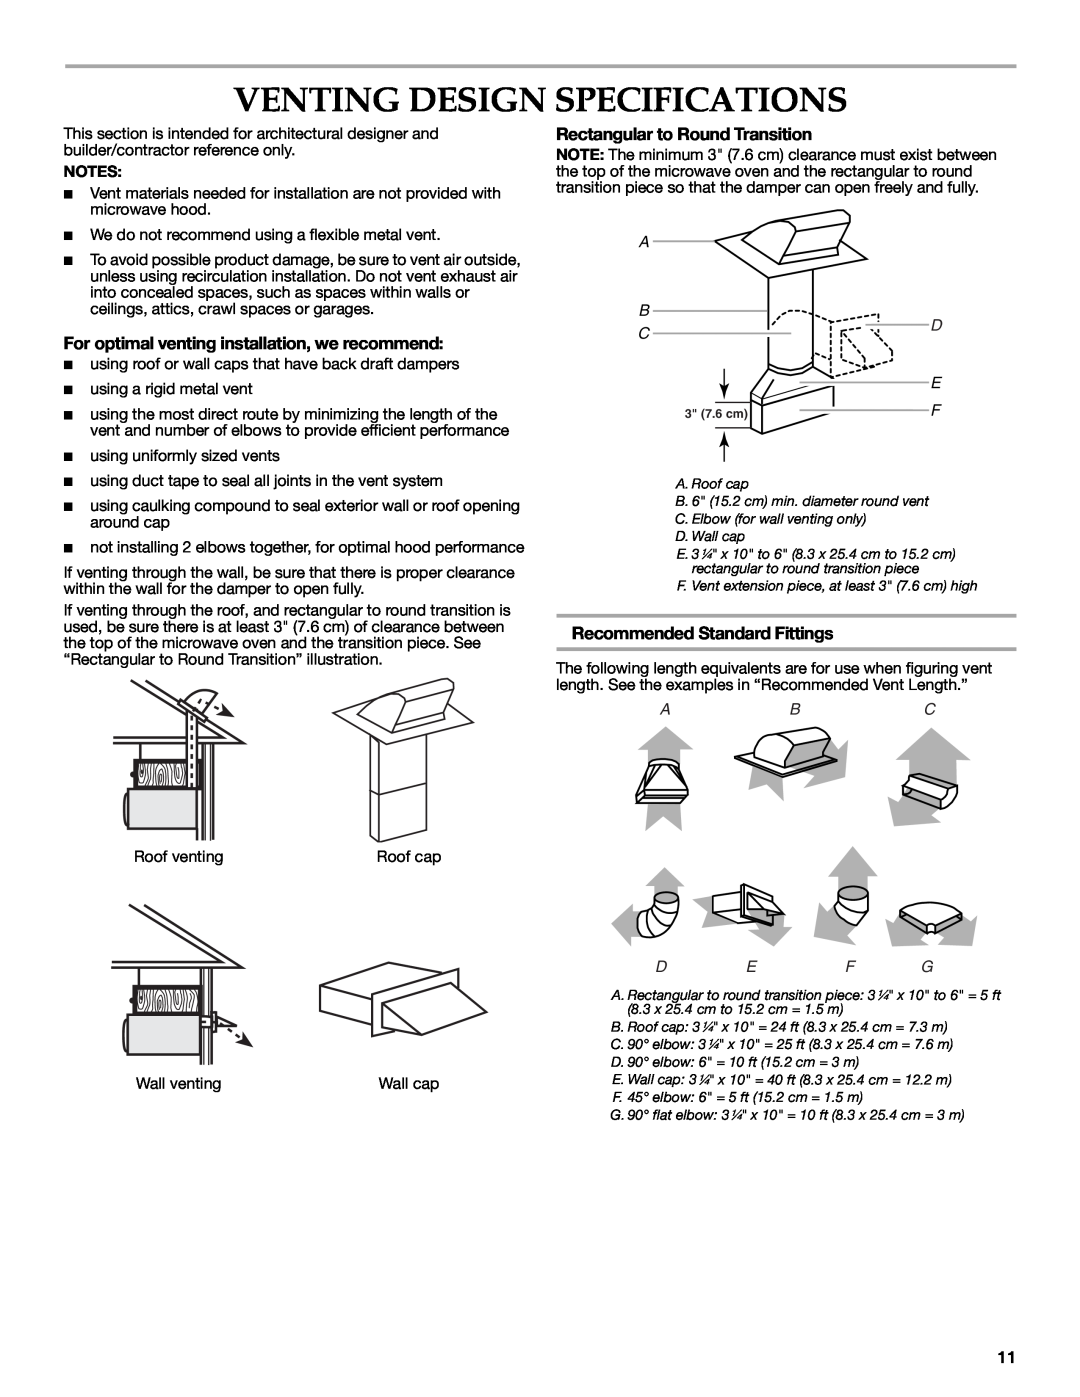 KitchenAid W10189714A, W10190011A Venting Design Specifications, For optimal venting installation, we recommend, Def G 